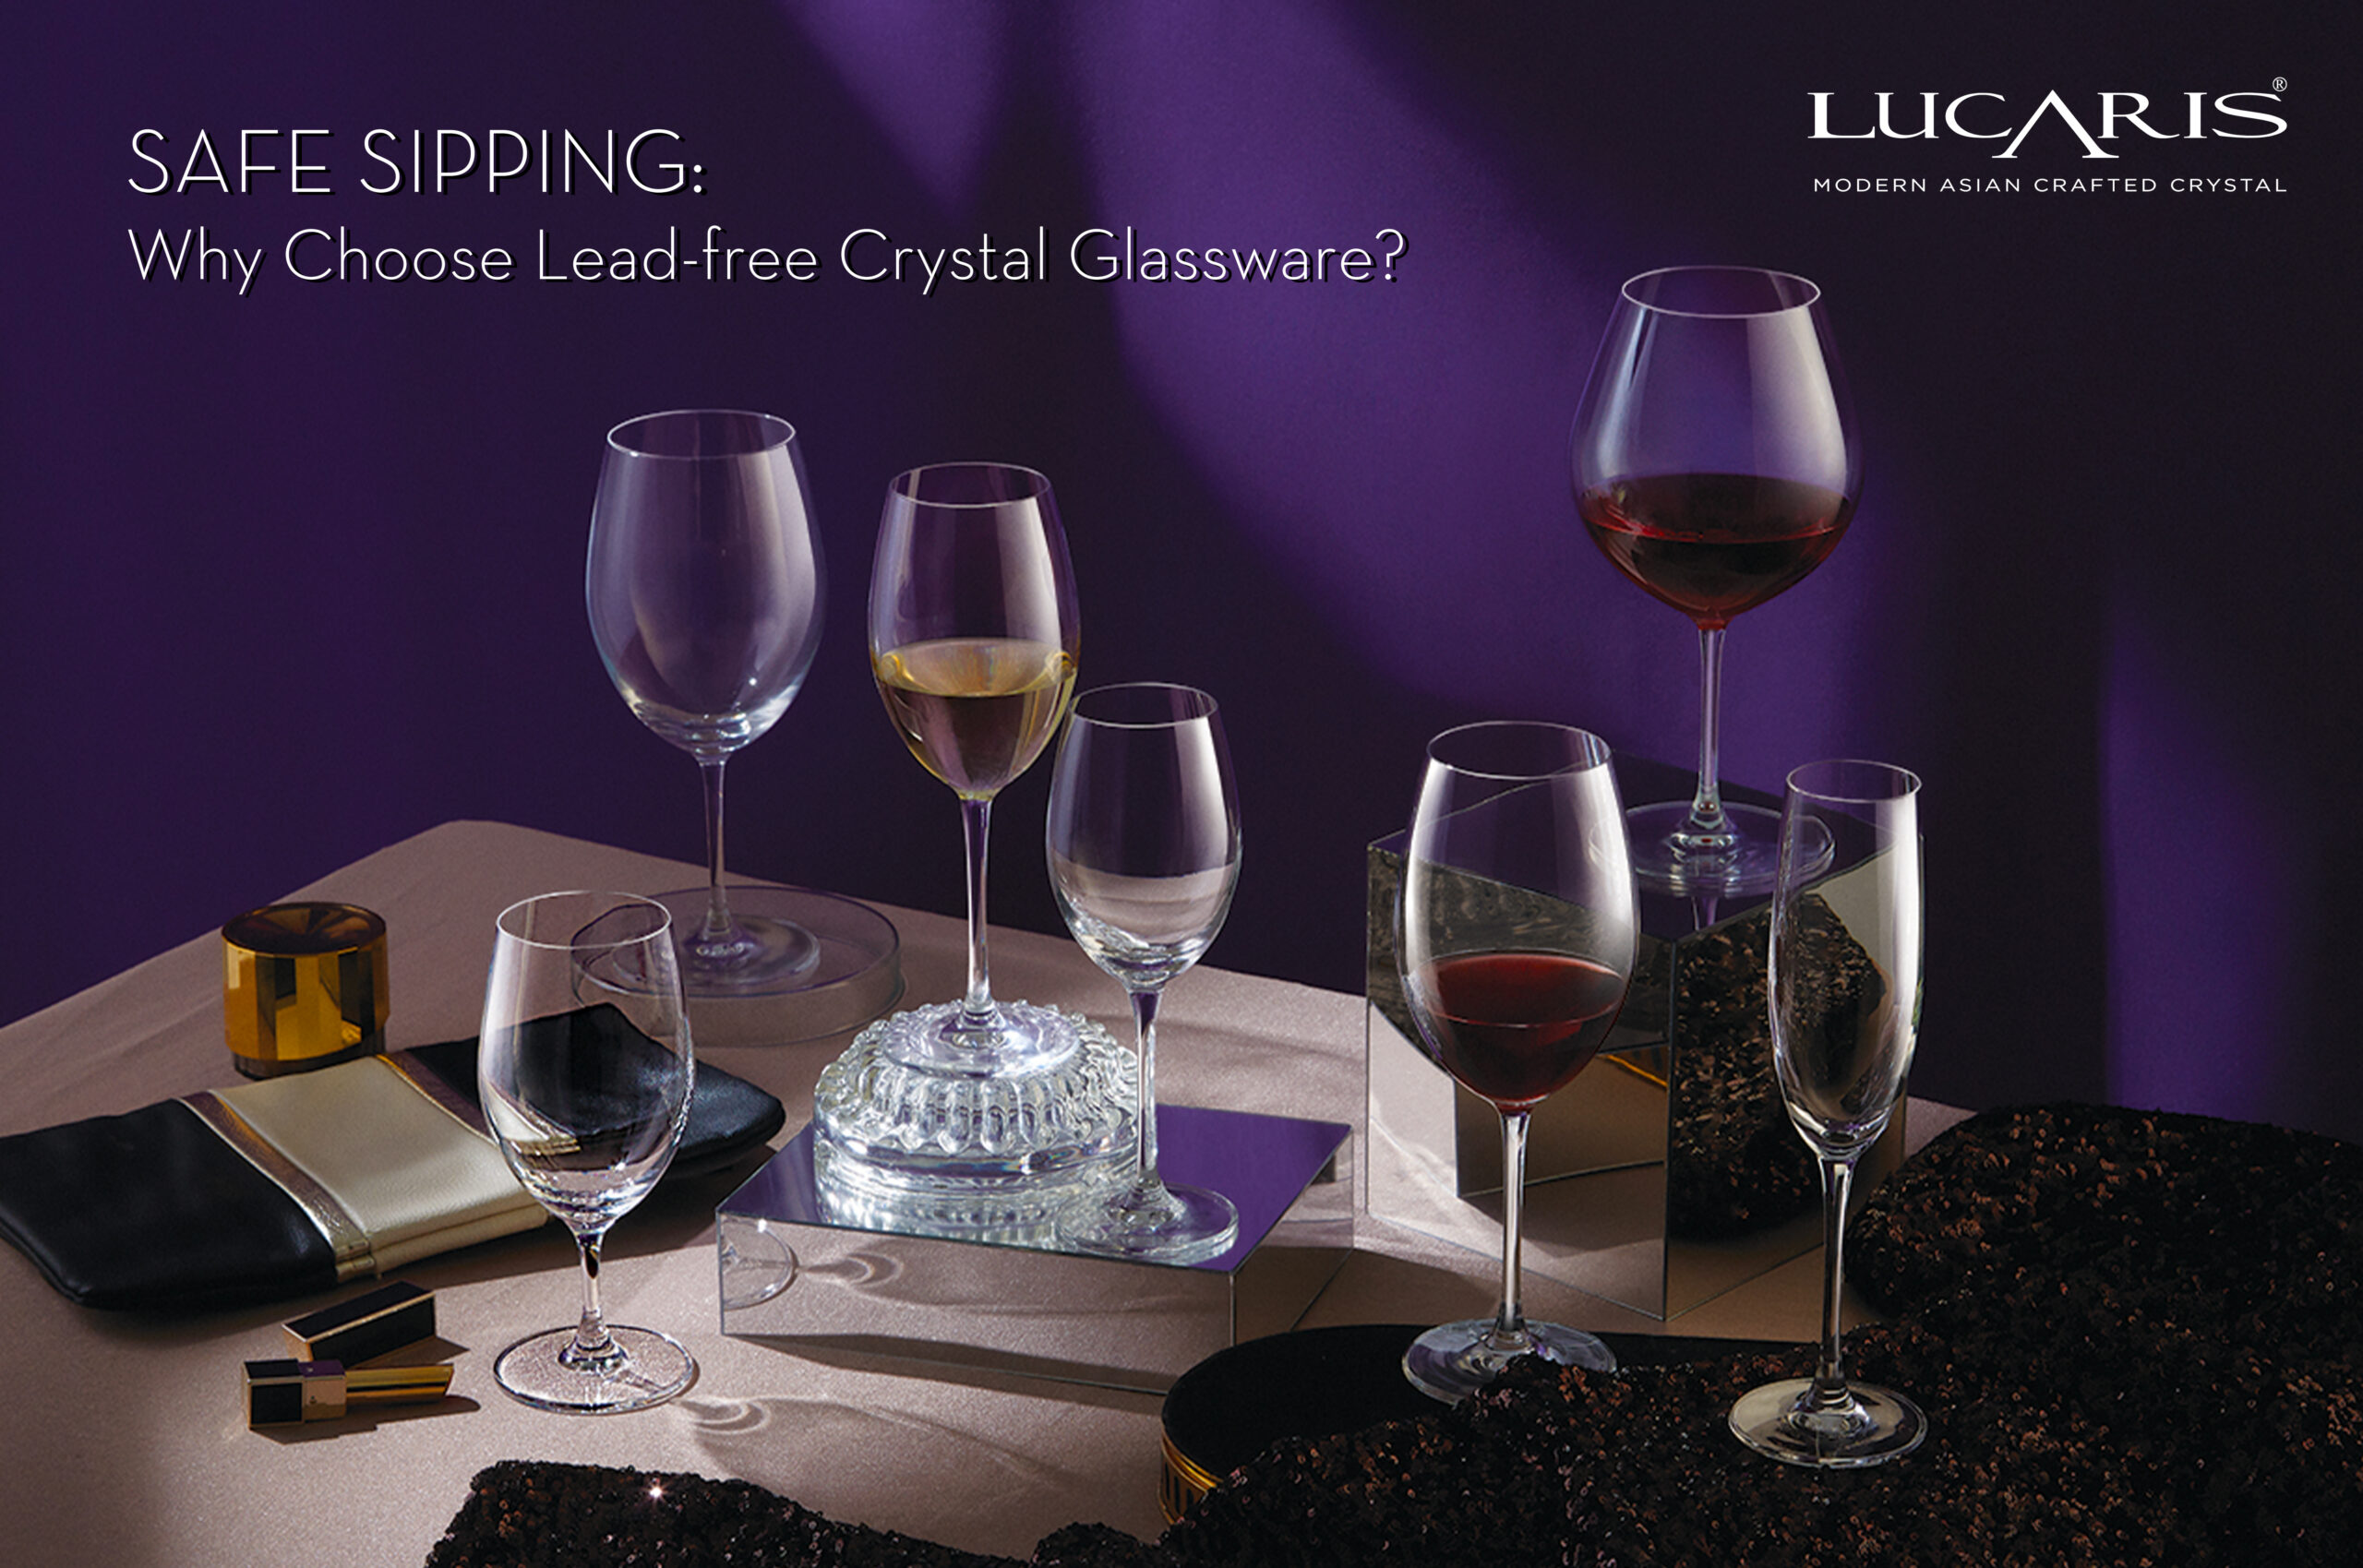 Safe Sipping: Why Choose Lead-free Crystal Glassware?